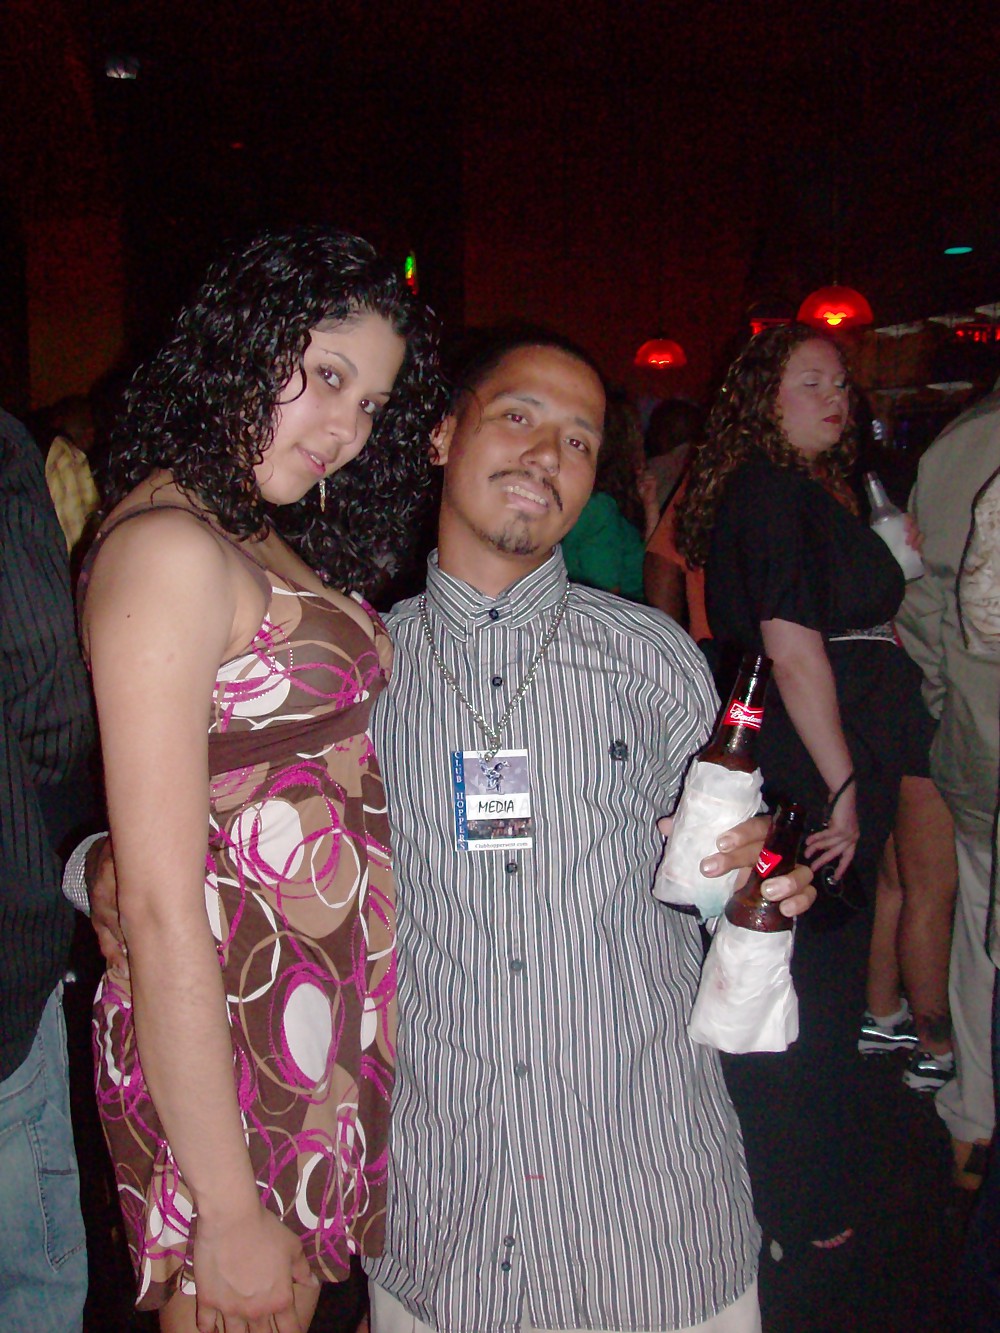 clubing having fun wit different hoes adult photos